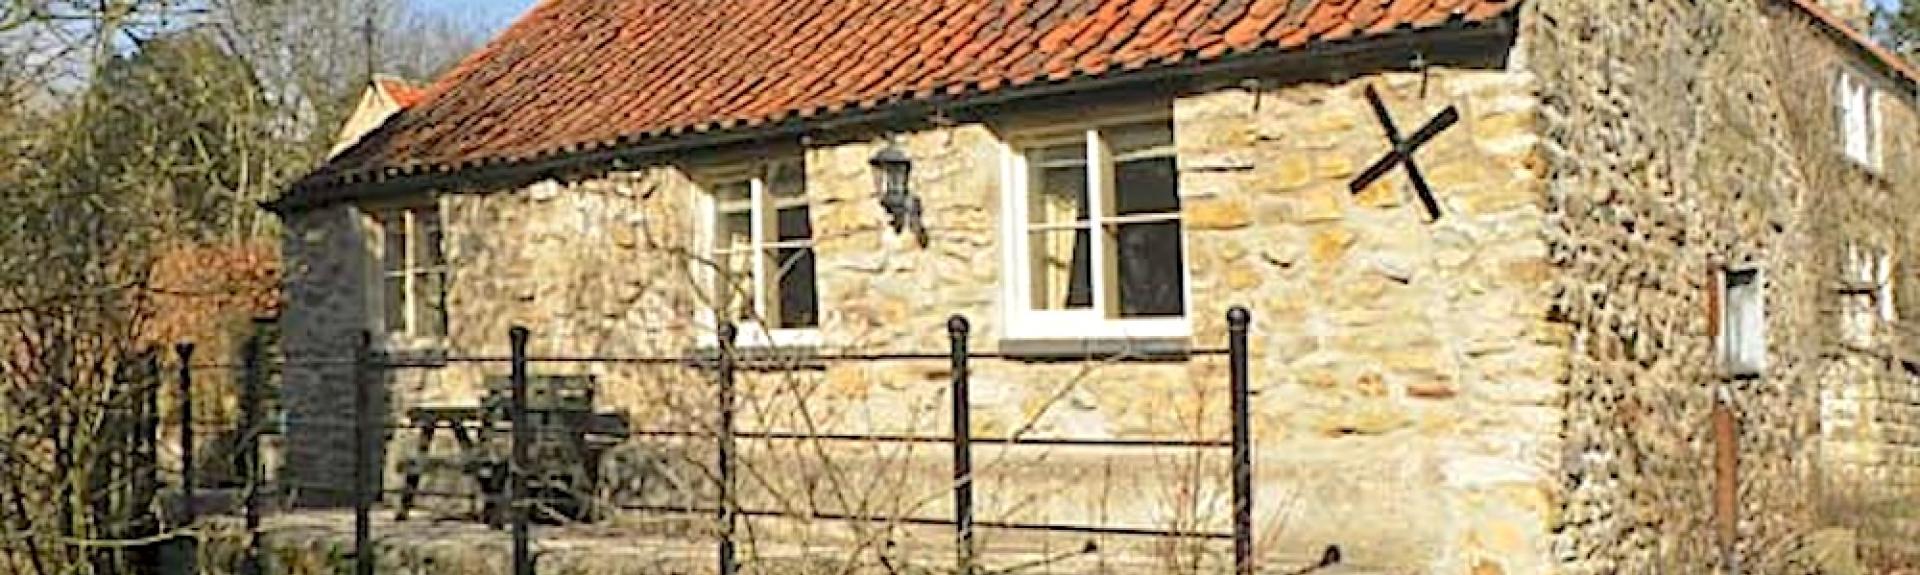 Exterior of a stone-built, single-storey stable converted to a holiday cottage.